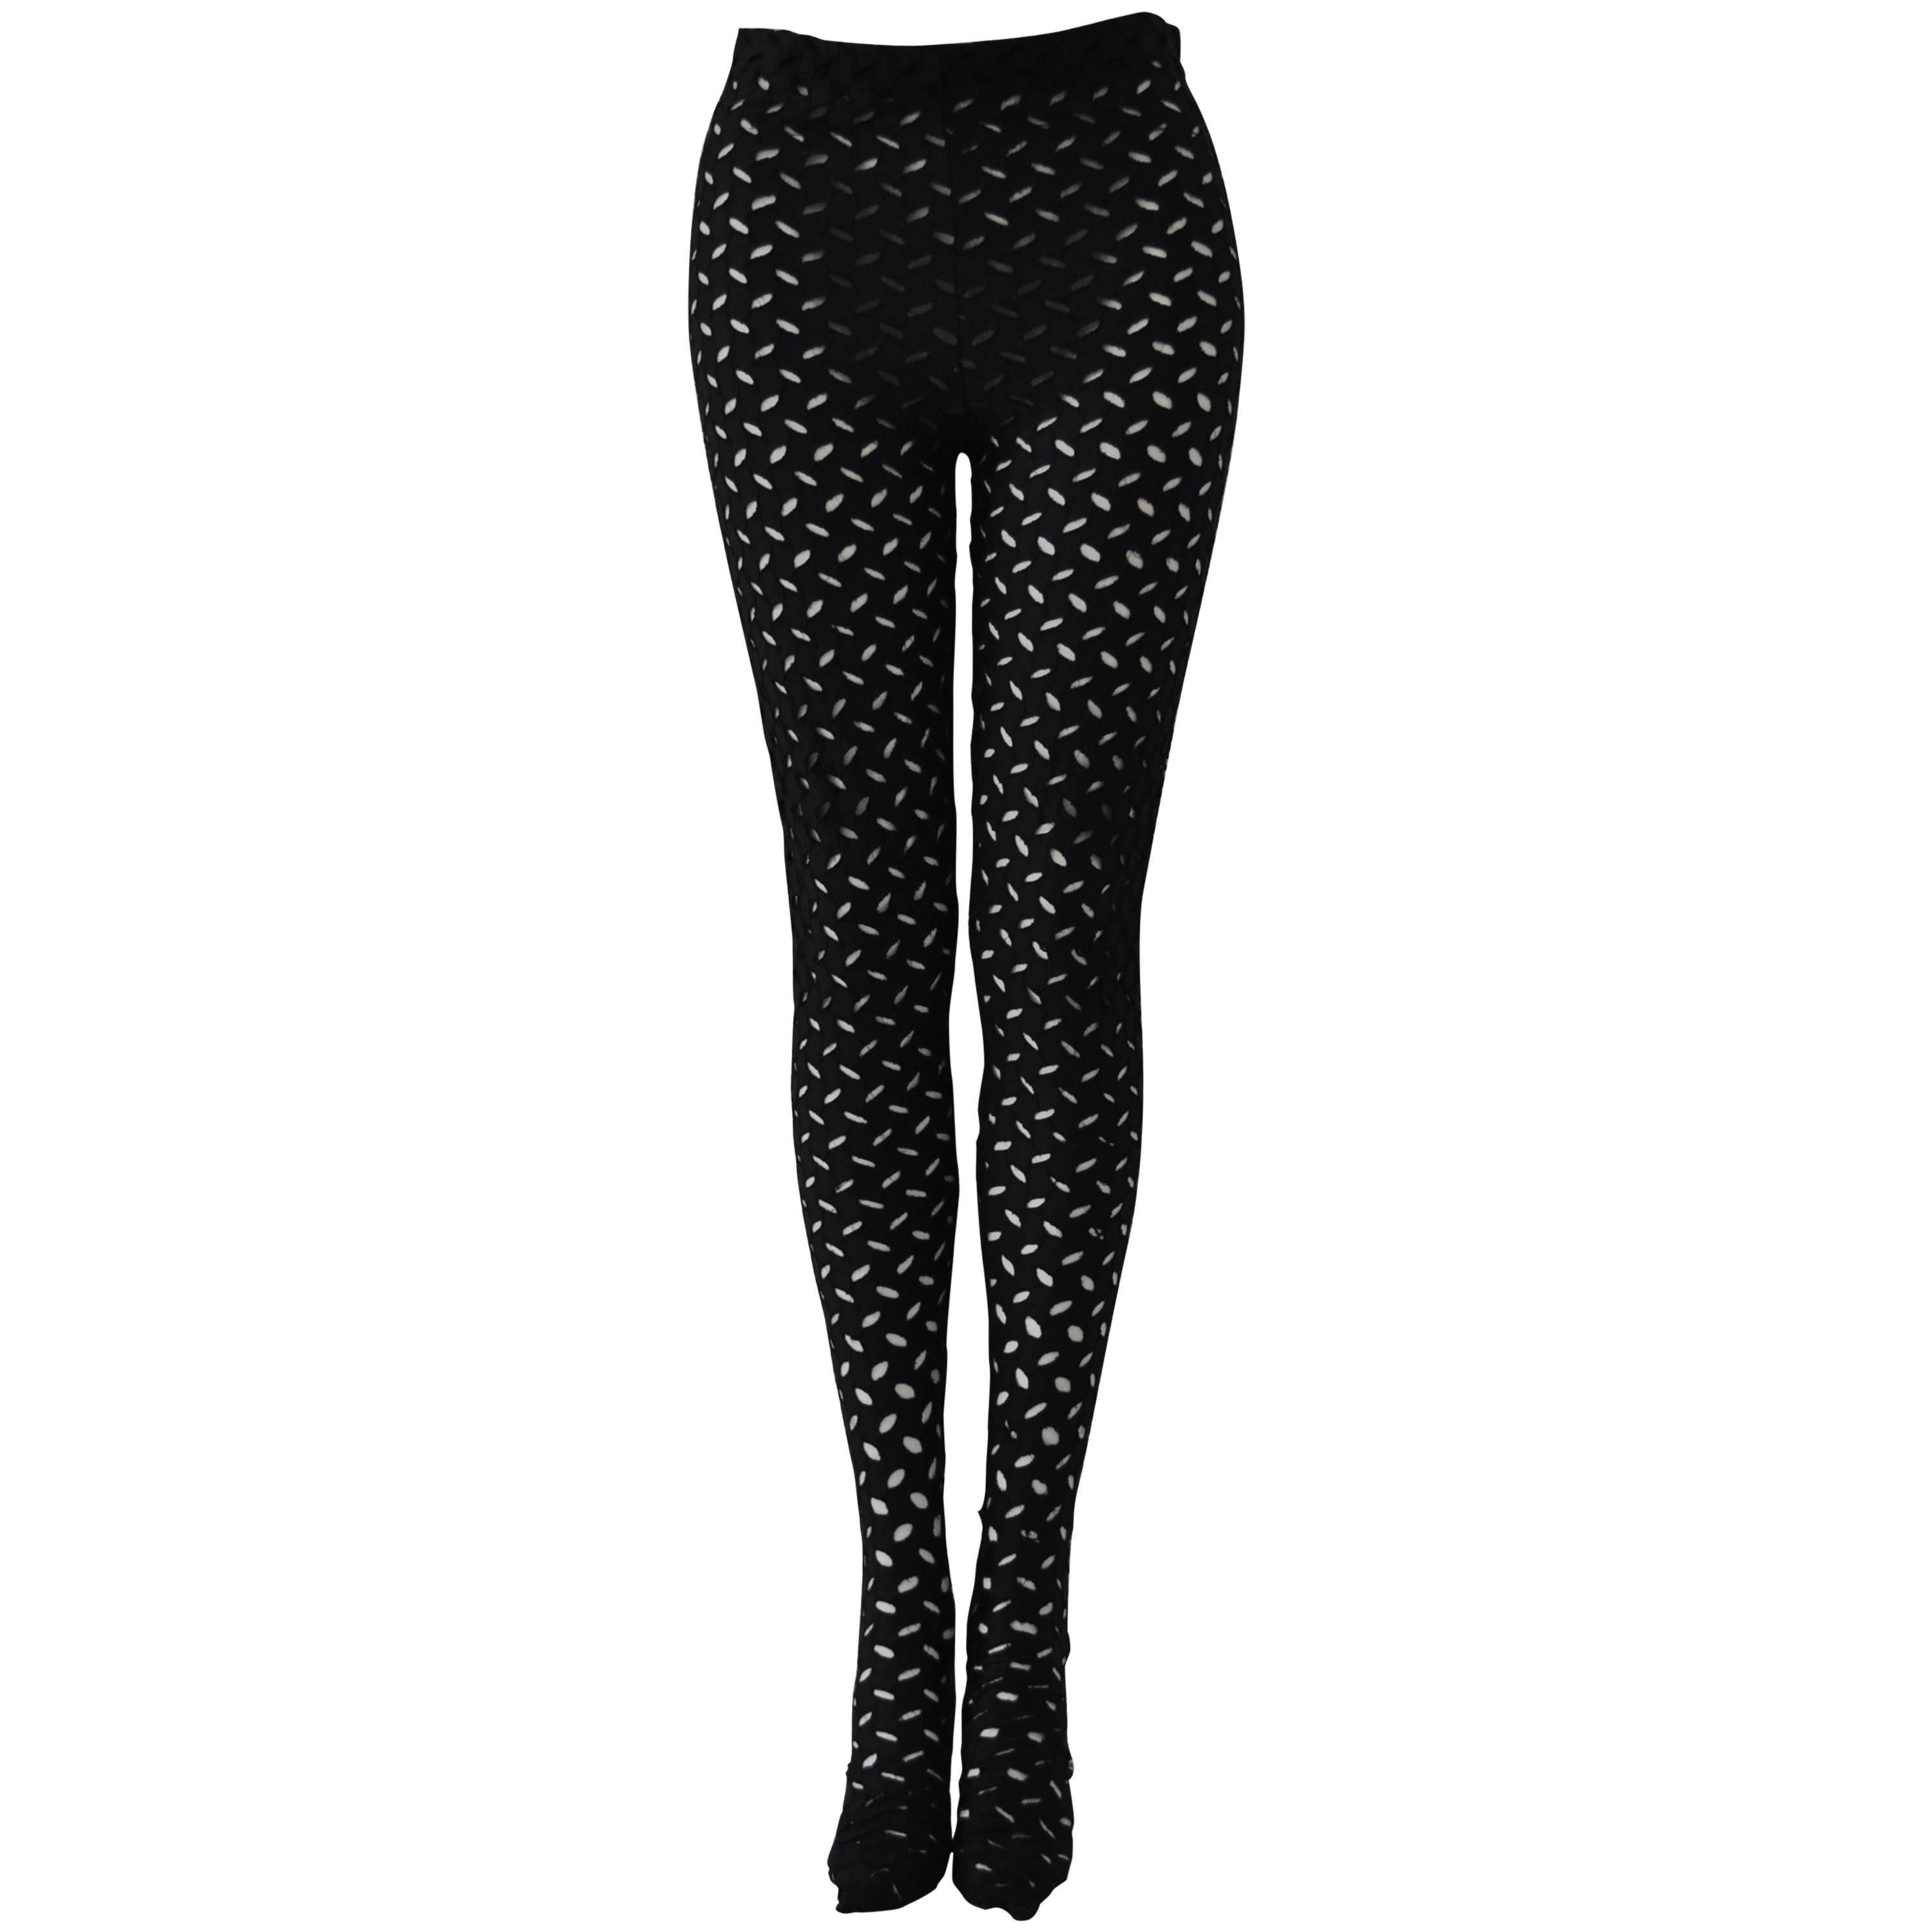 Iconic Gianni Versace Couture Punk Cut-Out Leggings For Sale